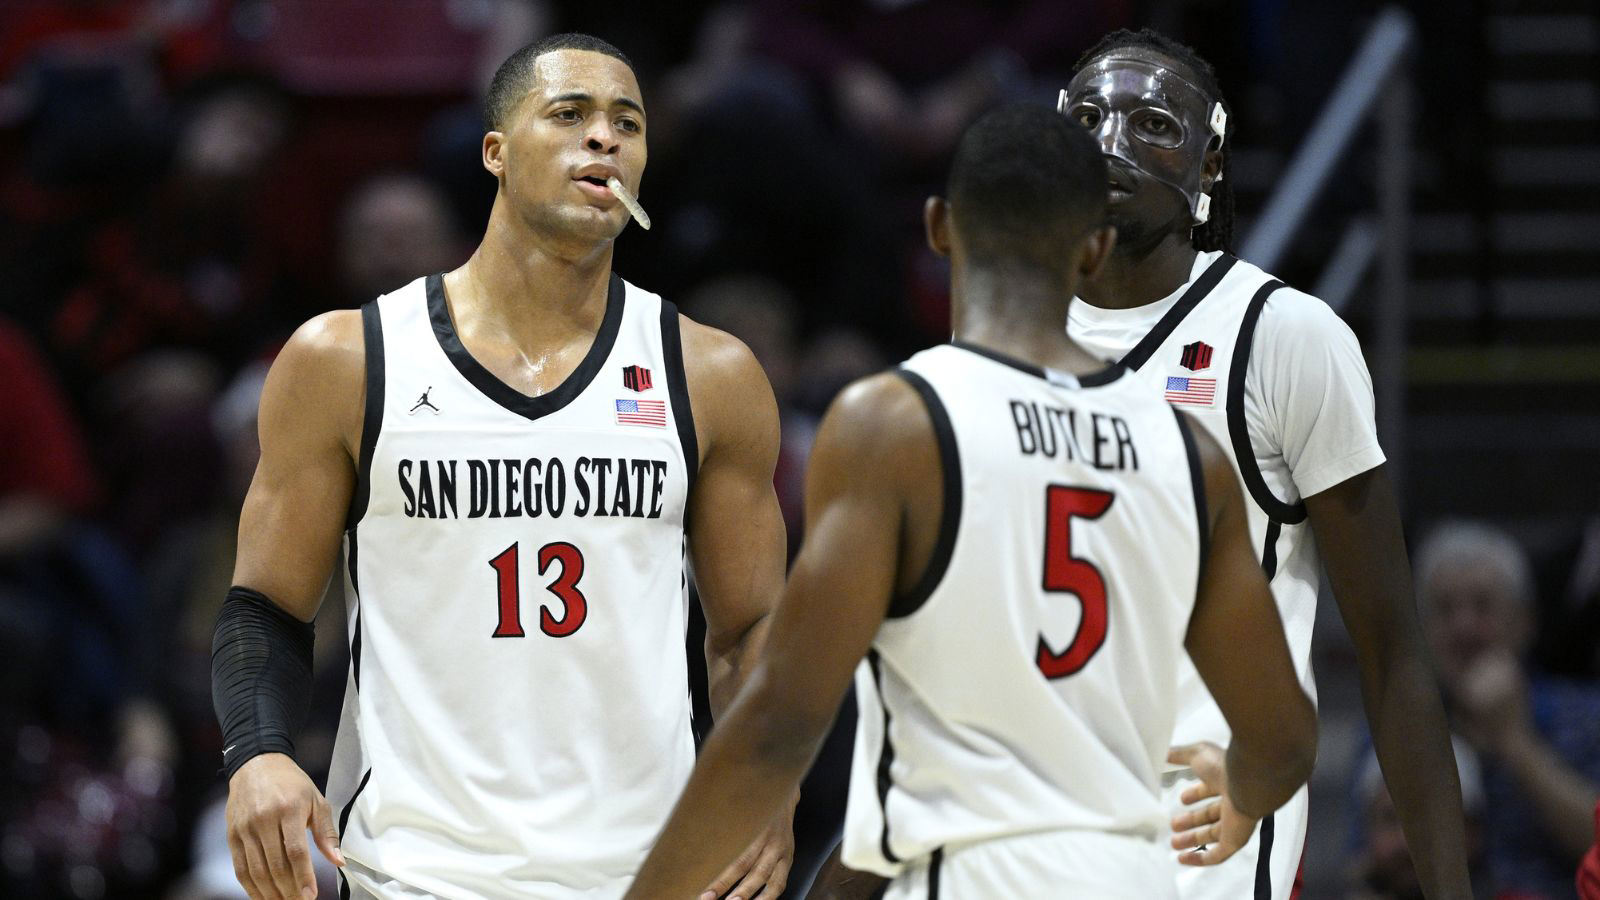 Sweet 16 Tussle Team's Power and SDSU Vs. UConn Preview